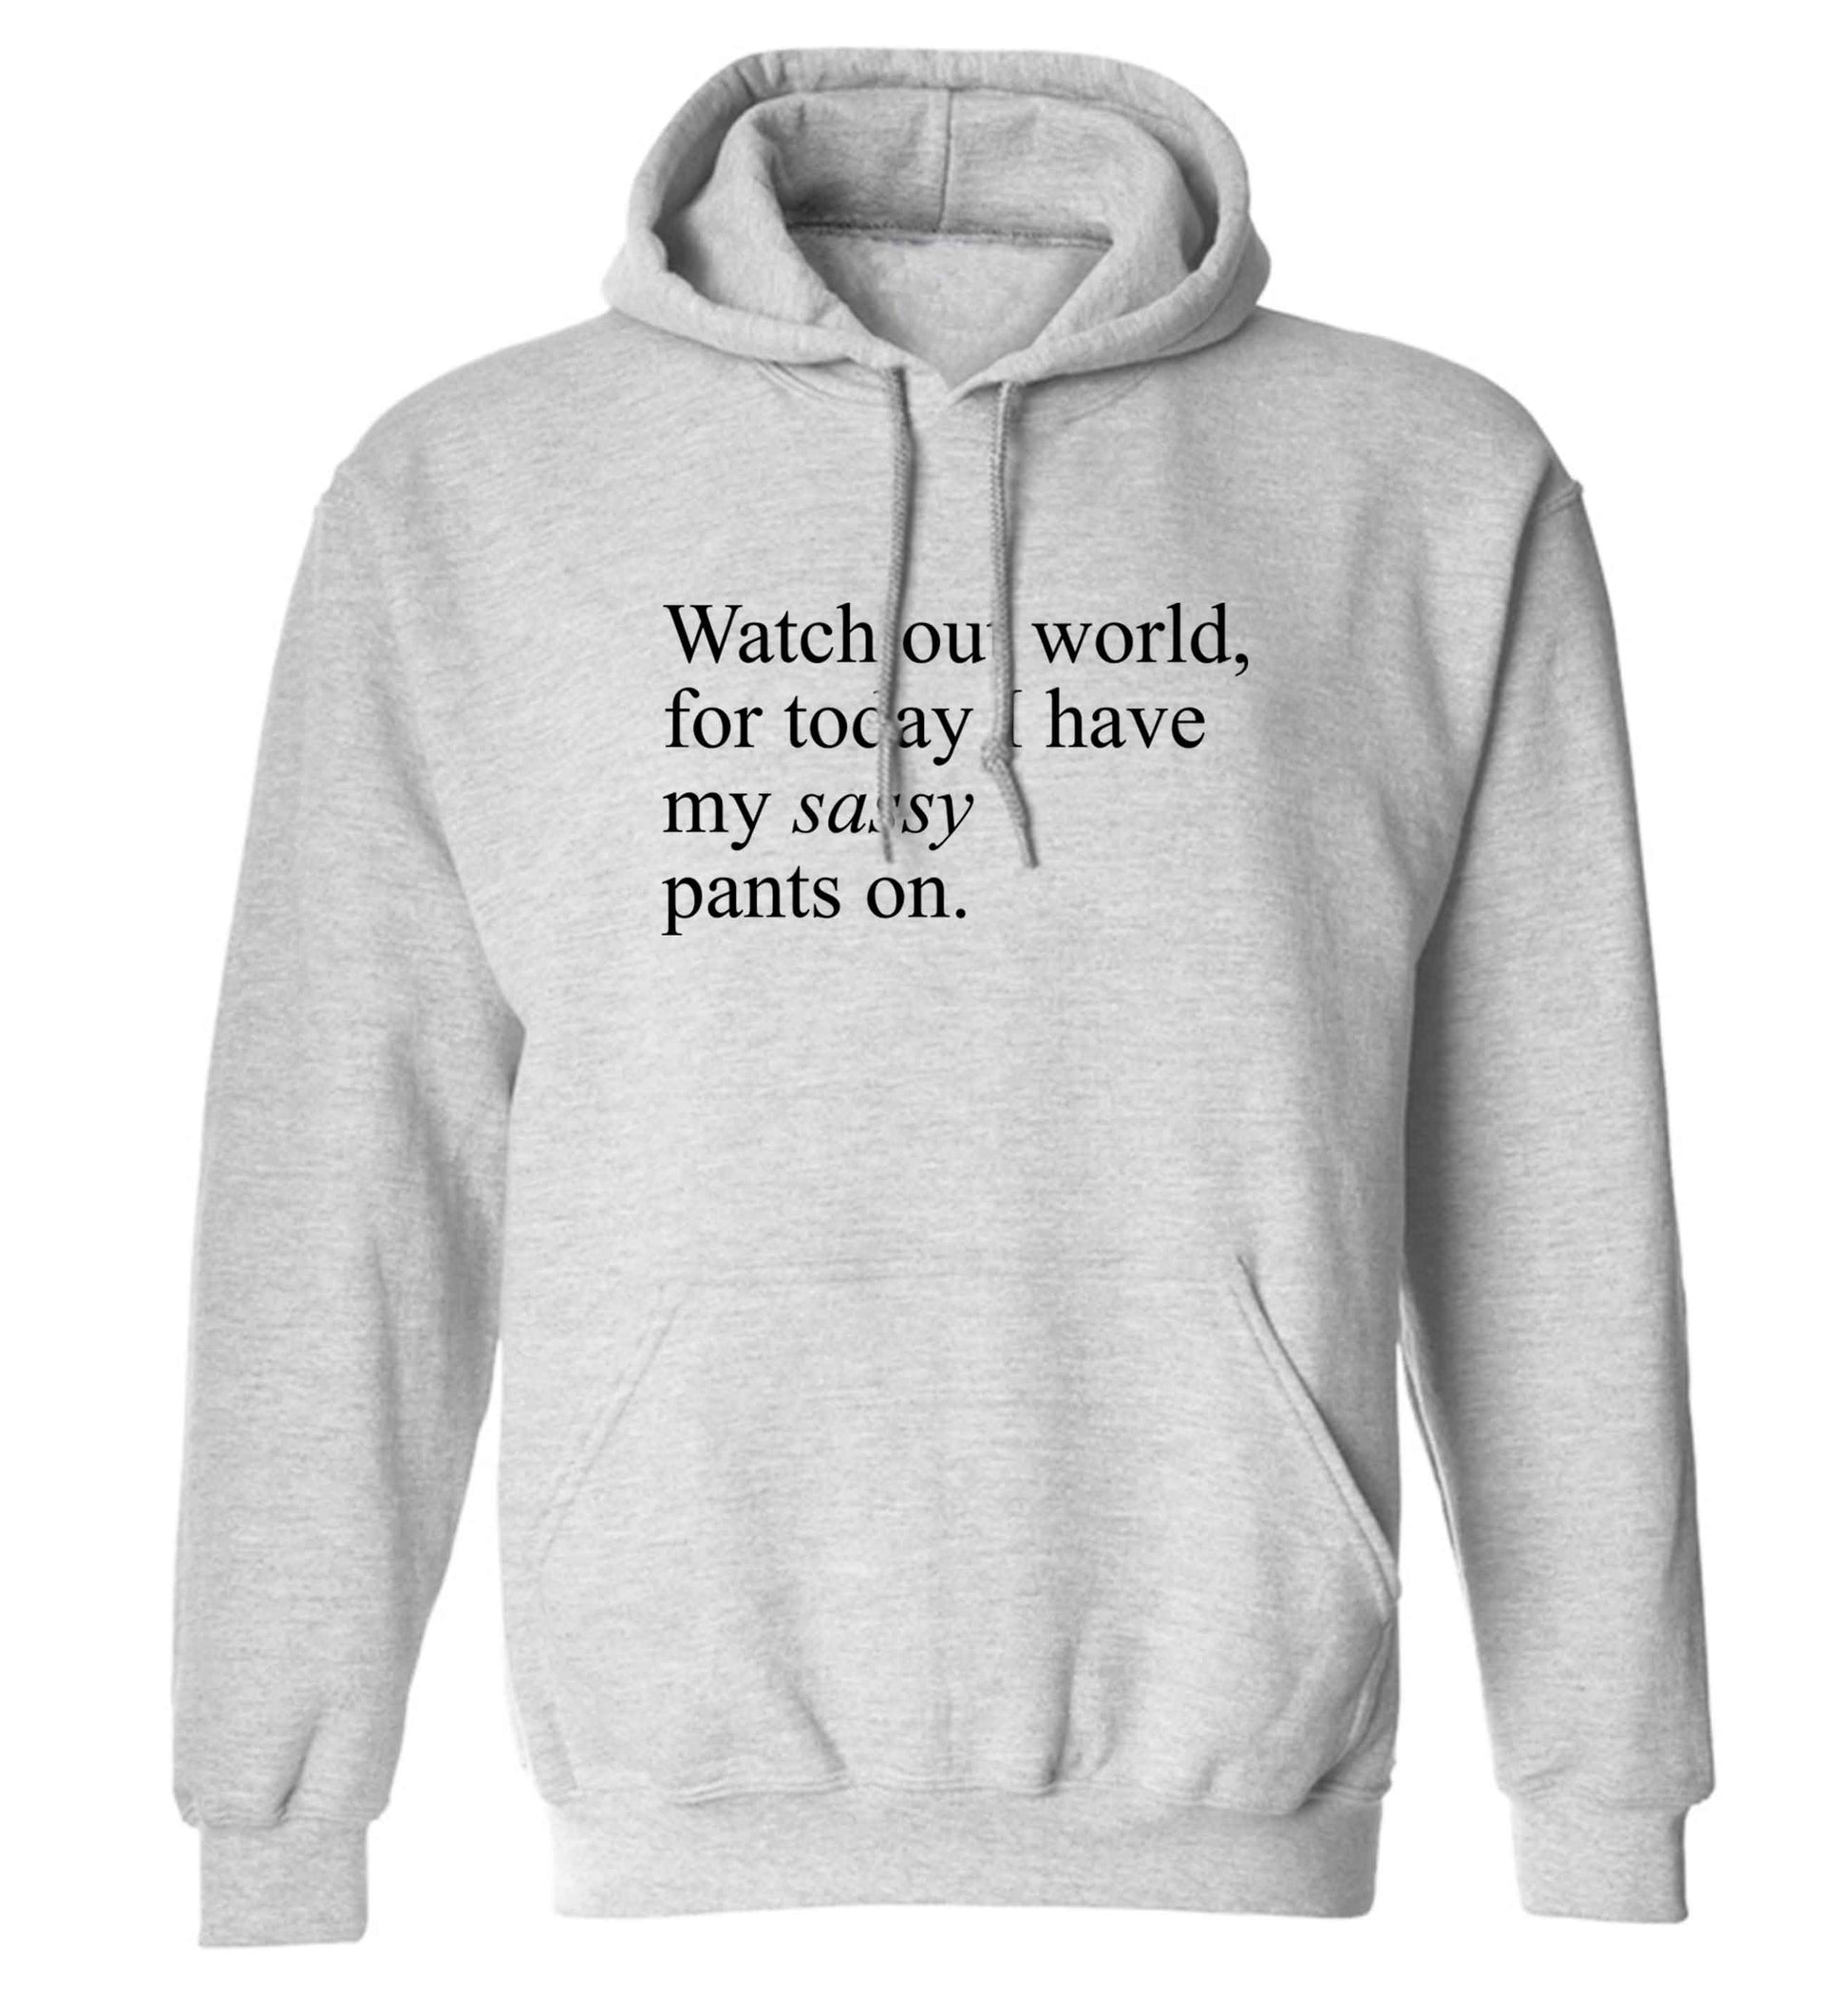 Watch out world for today I have my sassy pants on adults unisex grey hoodie 2XL